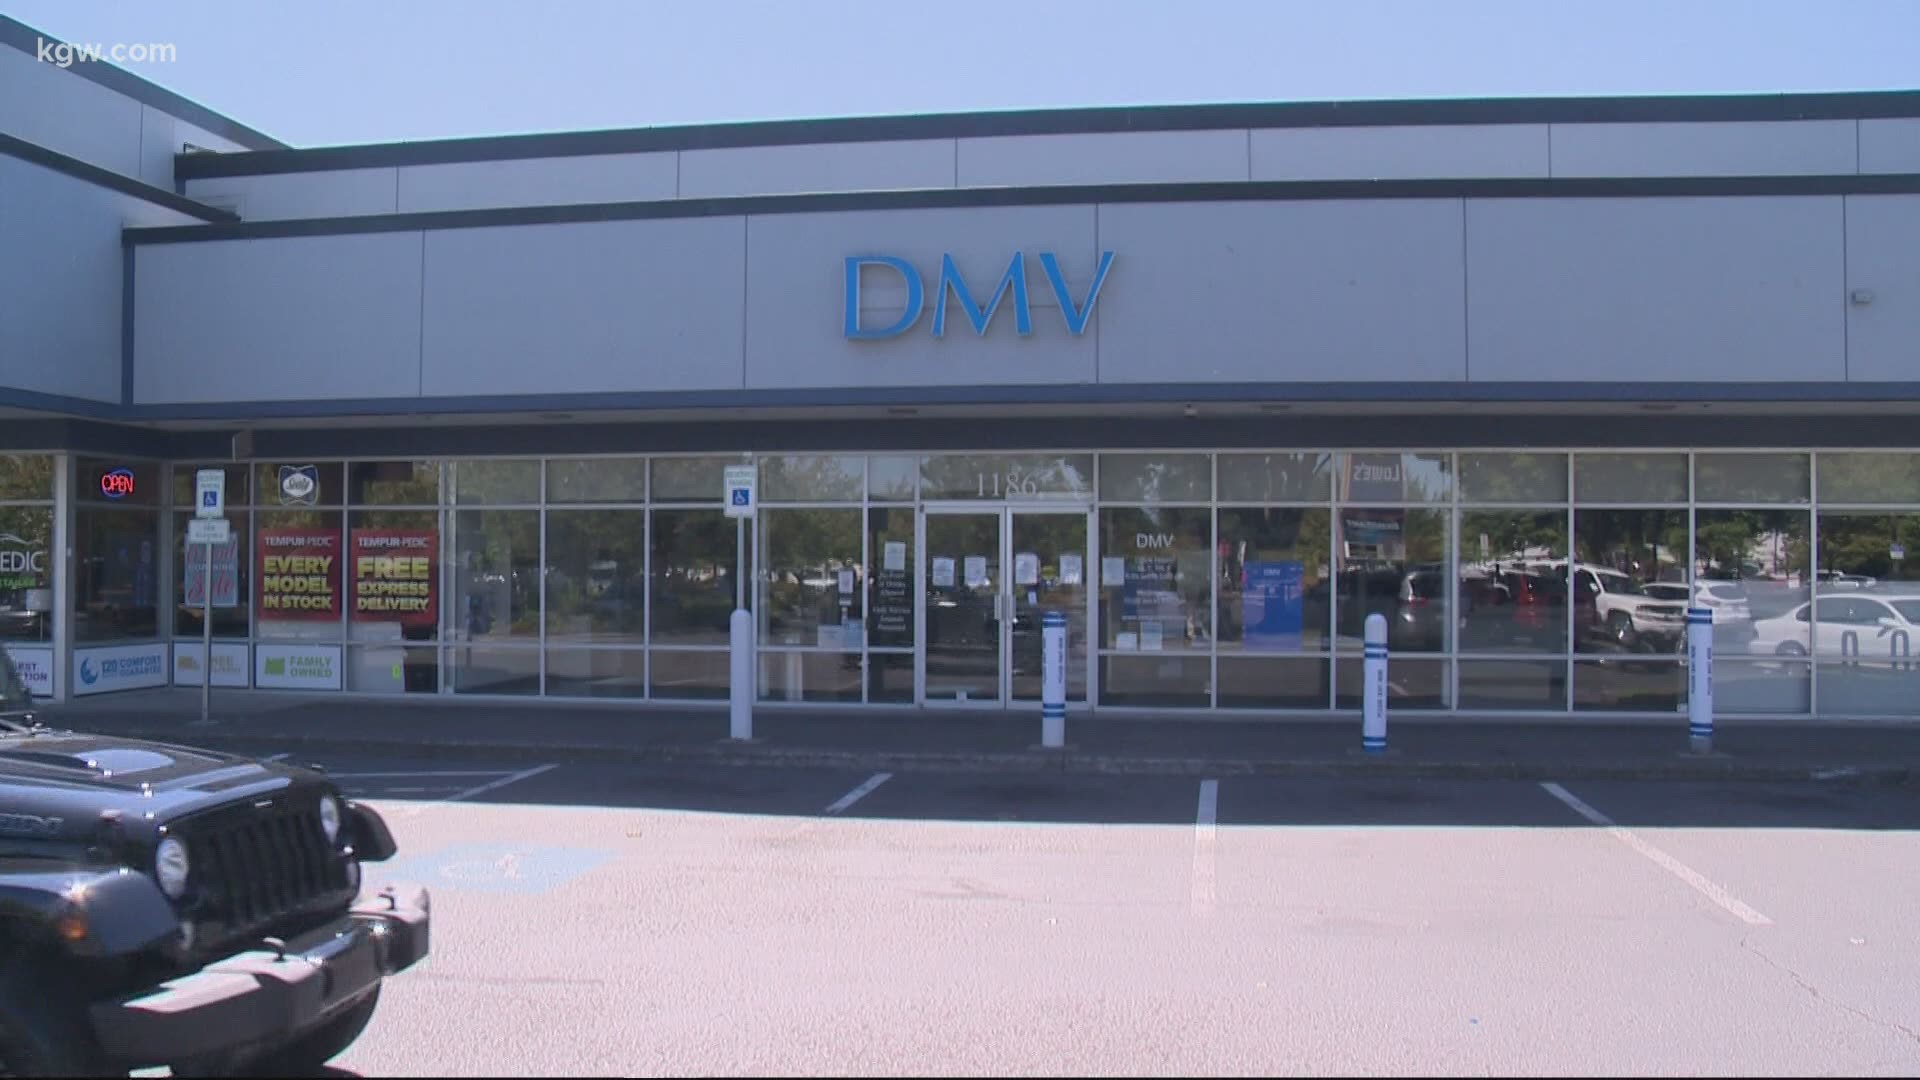 Oregon's DMV still has a backlog of customers. If you need to update your registration, you'll get some leeway, but make an appointment soon.